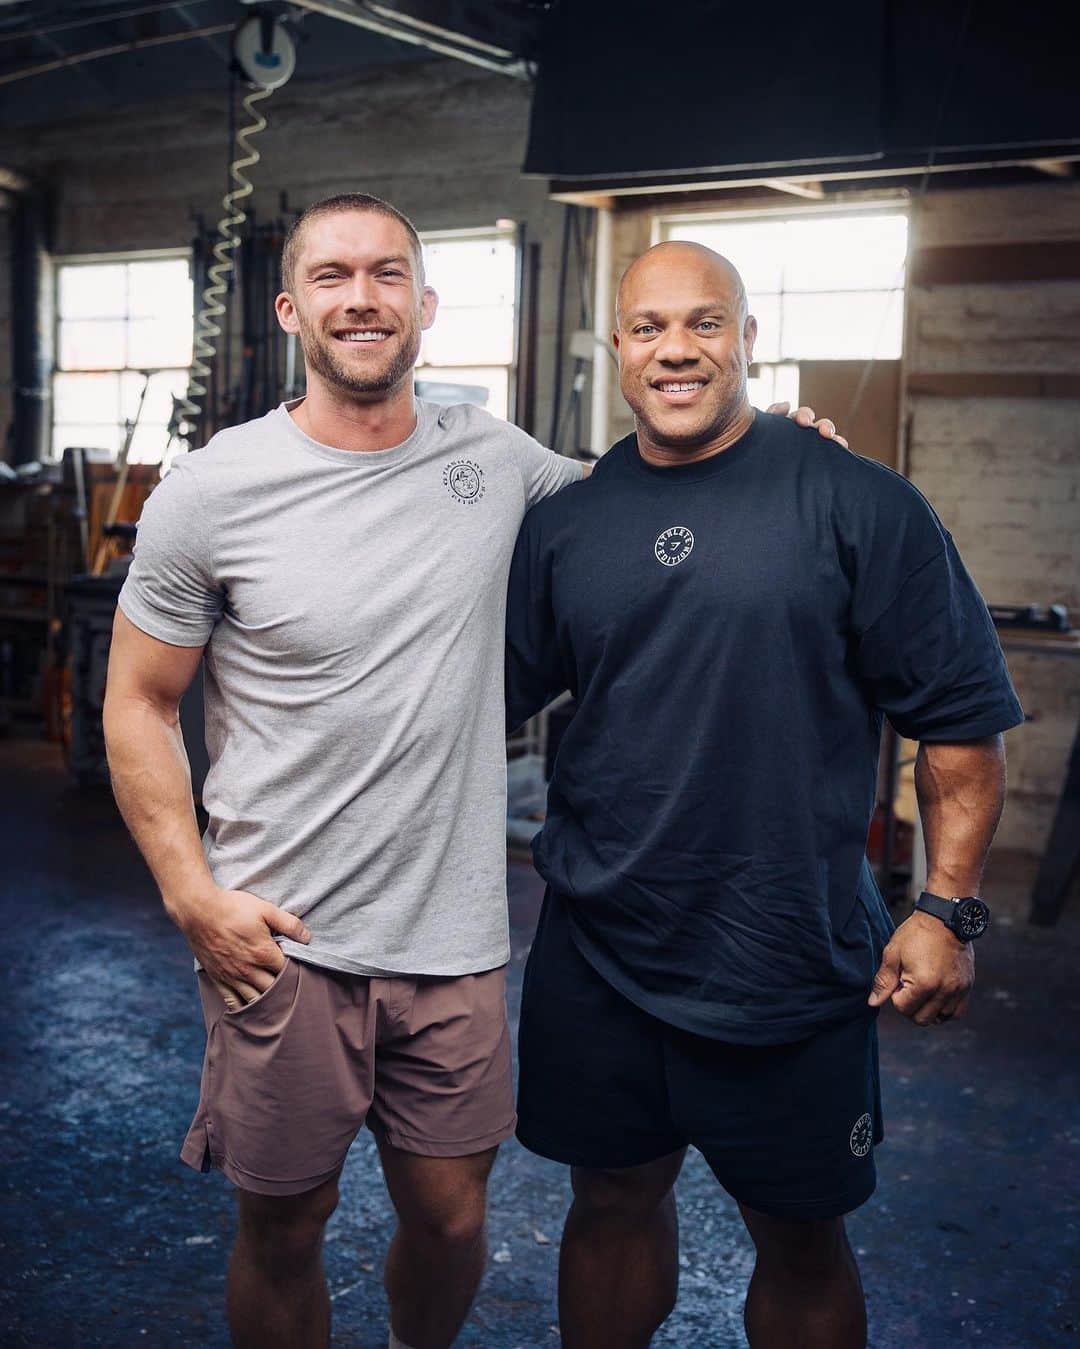 Phil Heathのインスタグラム：「Next Monday I’m releasing a brand new 2+ hour episode with 7x Mr Olympia Champion, @philheath 🚀⁣ ⁣ We took the Modern Wisdom Cinema production team out to a wild location in LA at an actual woodwork shop with gorgeous natural light and a phenomenal background to go through Phil’s reflections on his rivalry with Kai Greene, what it was like being a part of the Generation Iron documentary, how to improve your relationship with pain, how to conquer small impulses, why Phil used far fewer PEDs than everyone thinks, his 10 best exercises for building muscle, what he thinks of Chris Bumstead, his opinion on the current field of Olympia competitors and much more…⁣ ⁣ Some absolute fuego including never-before-heard stories in this one. Get ready!」